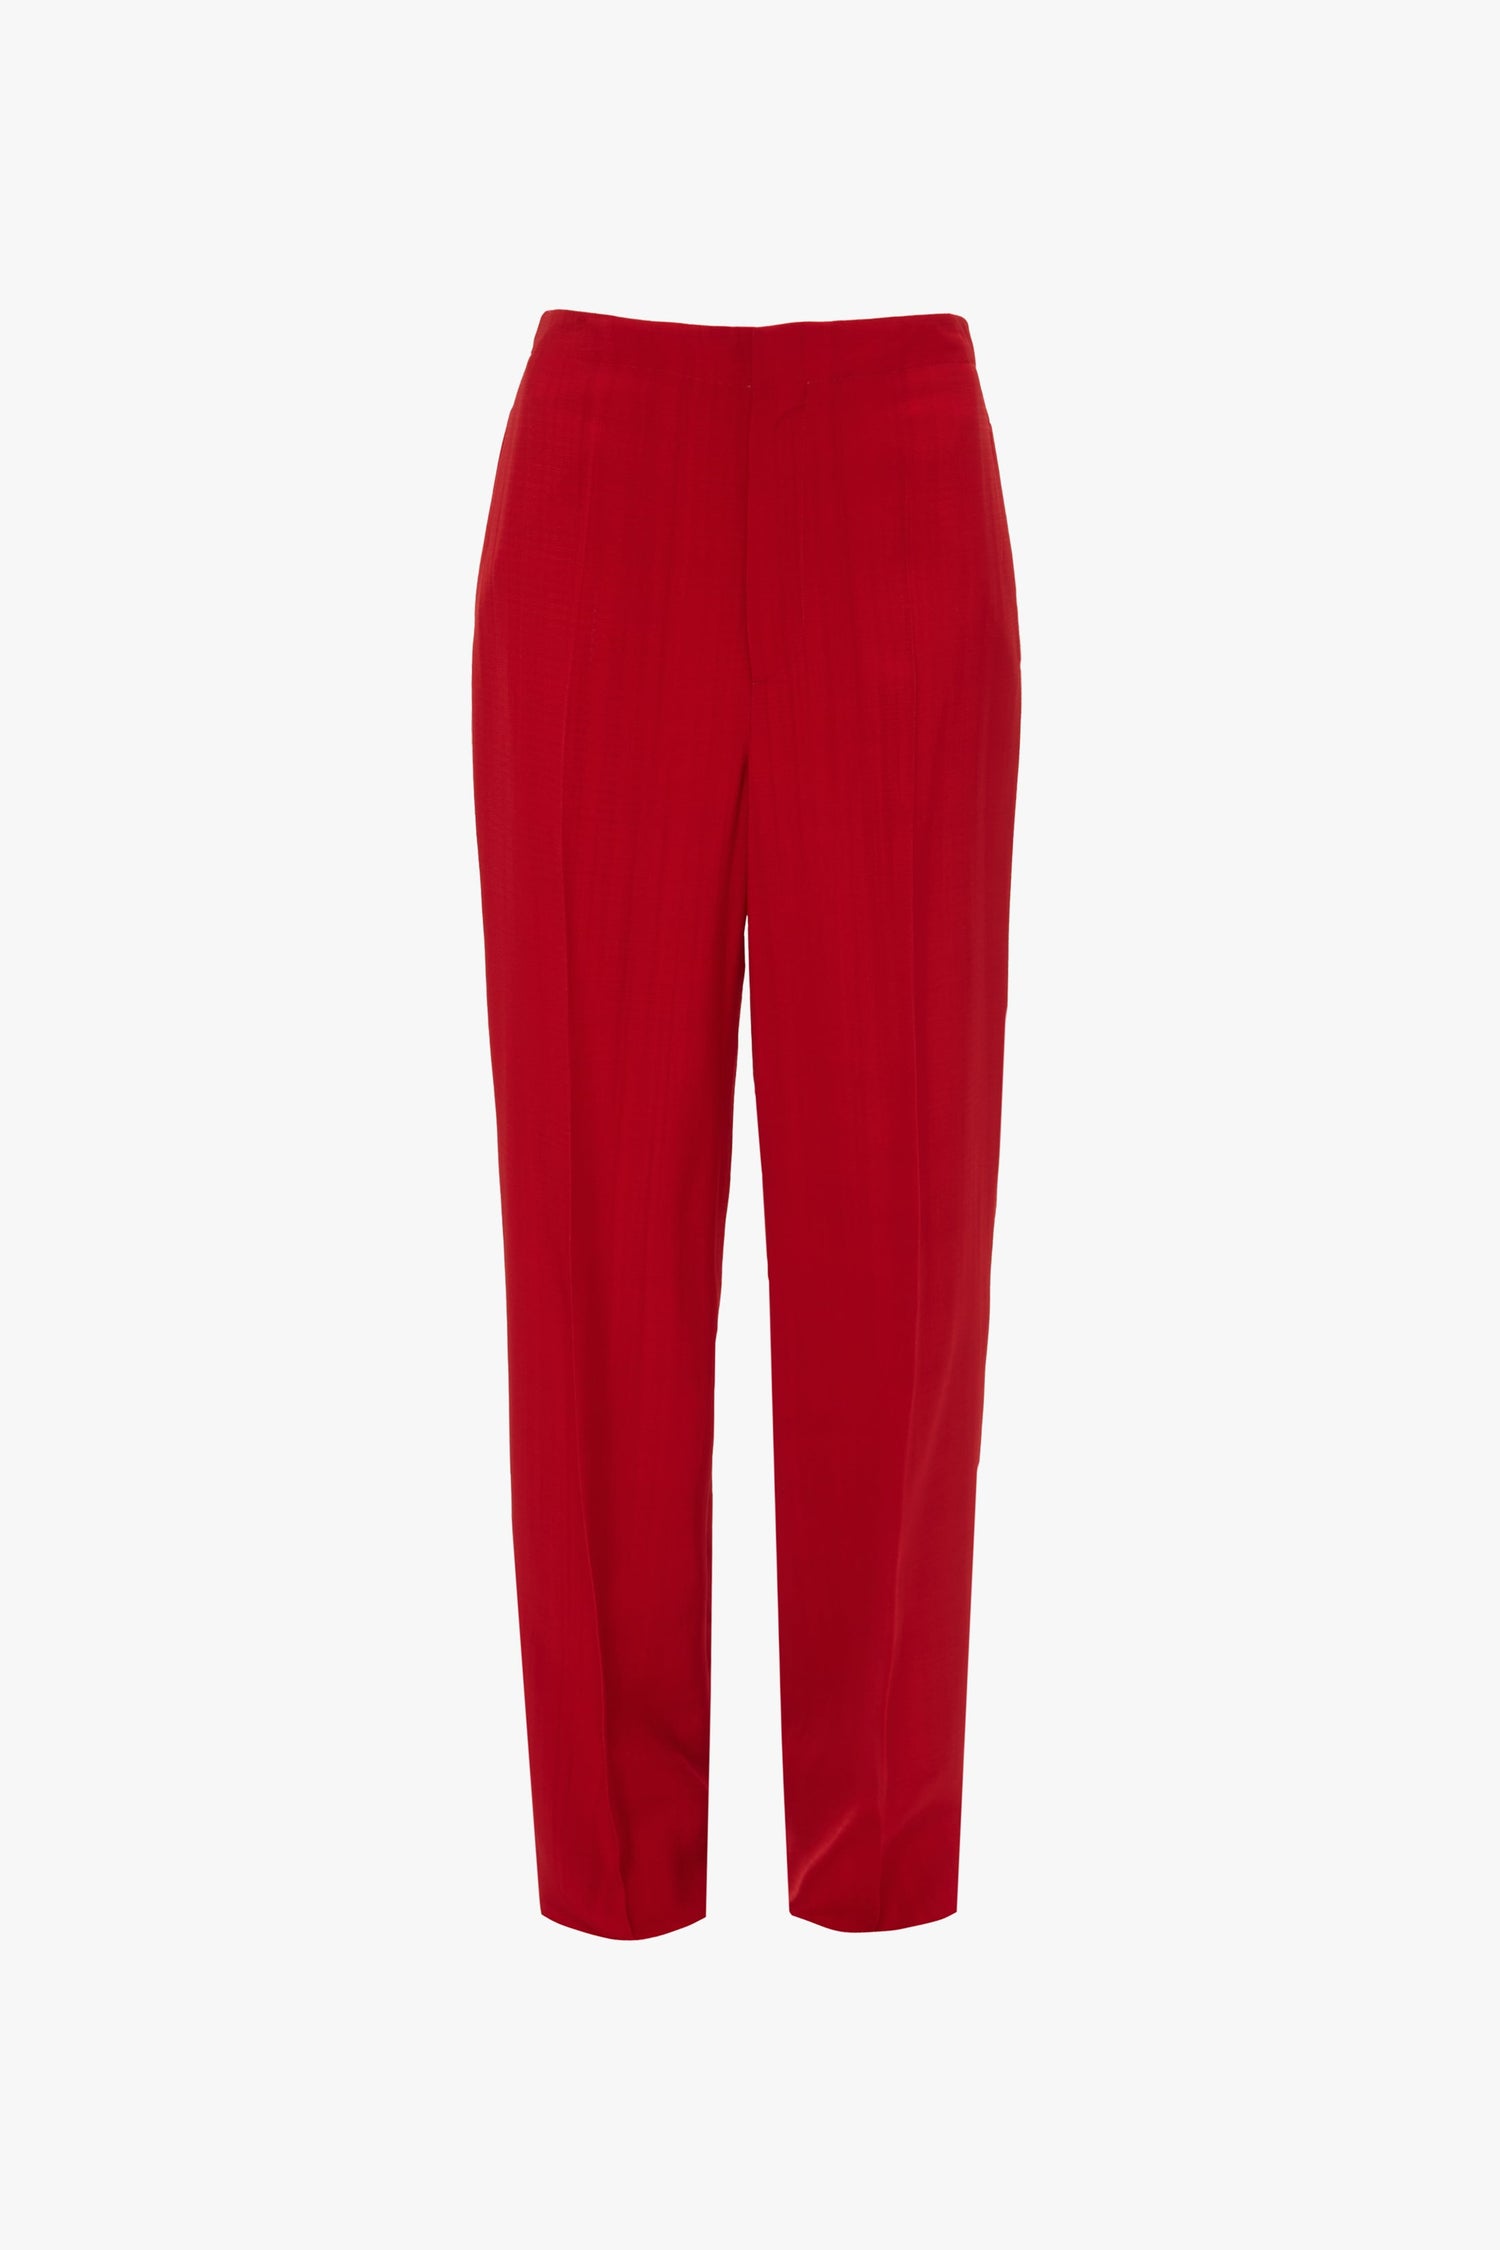 Tapered Leg Trouser In Carmine with a high waist and tailored fit, showcasing traditional tailoring for a lean silhouette by Victoria Beckham, shown against a white background.